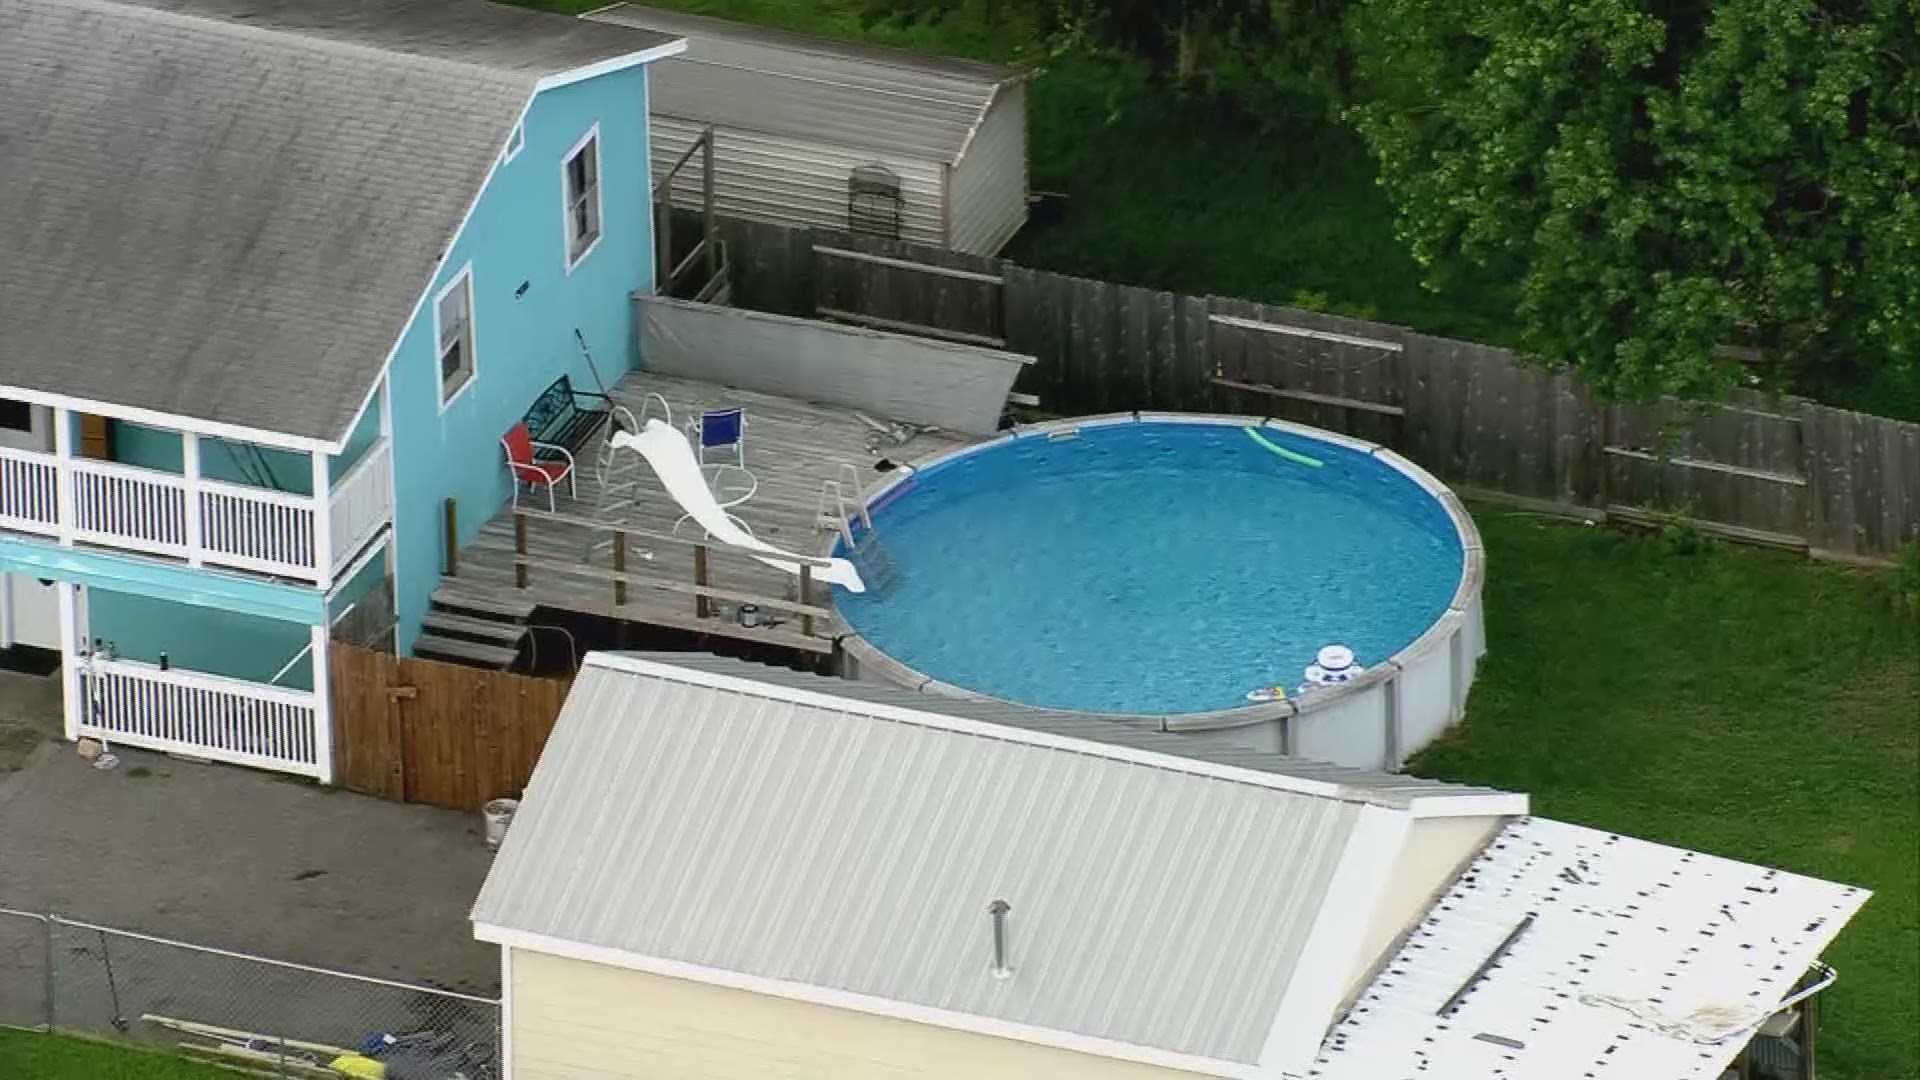 Police responding to a report of a missing child found the 1-year-old face-down in the pool.